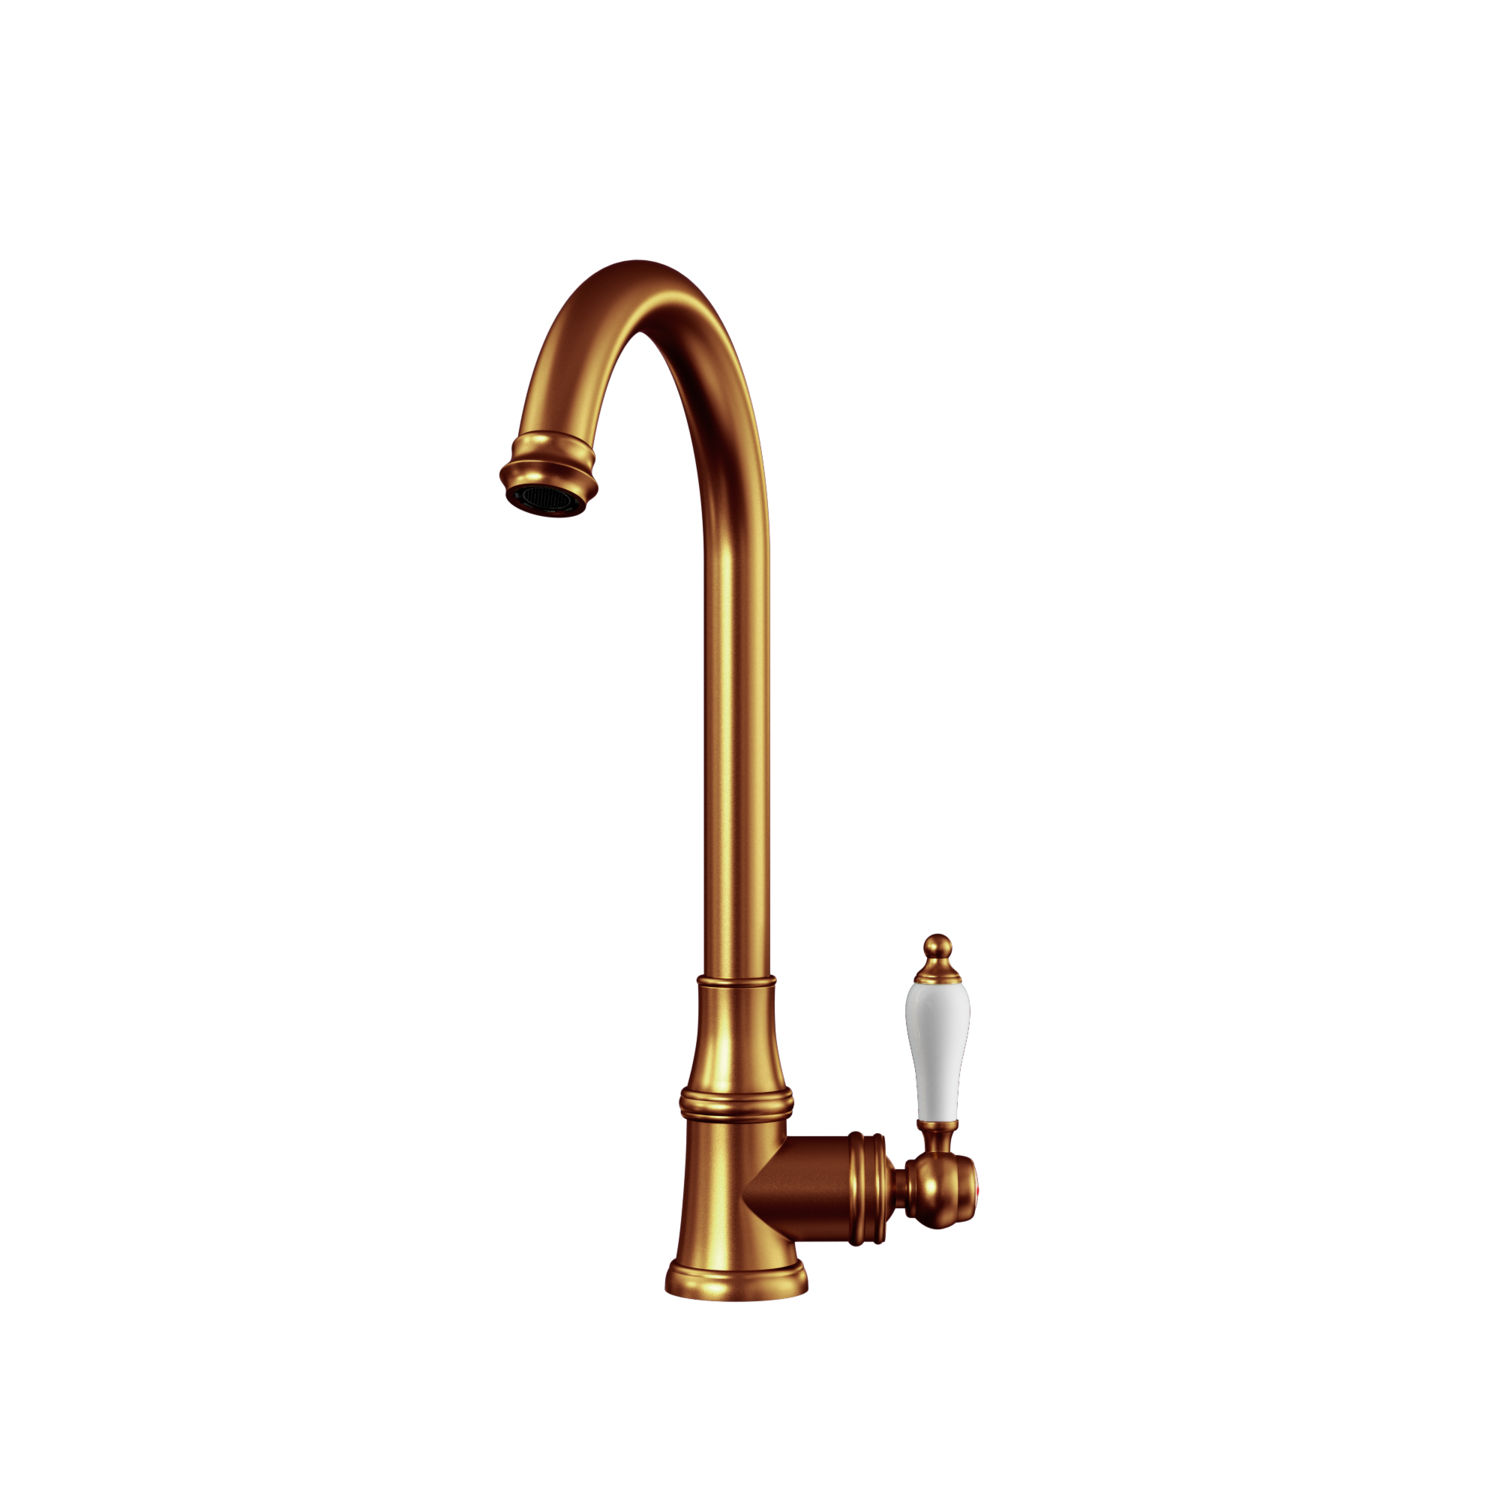 Taylor & Moore Hastings Traditional Kitchen Mixer Tap with Swivel Spout & Single Lever - Brushed Cop